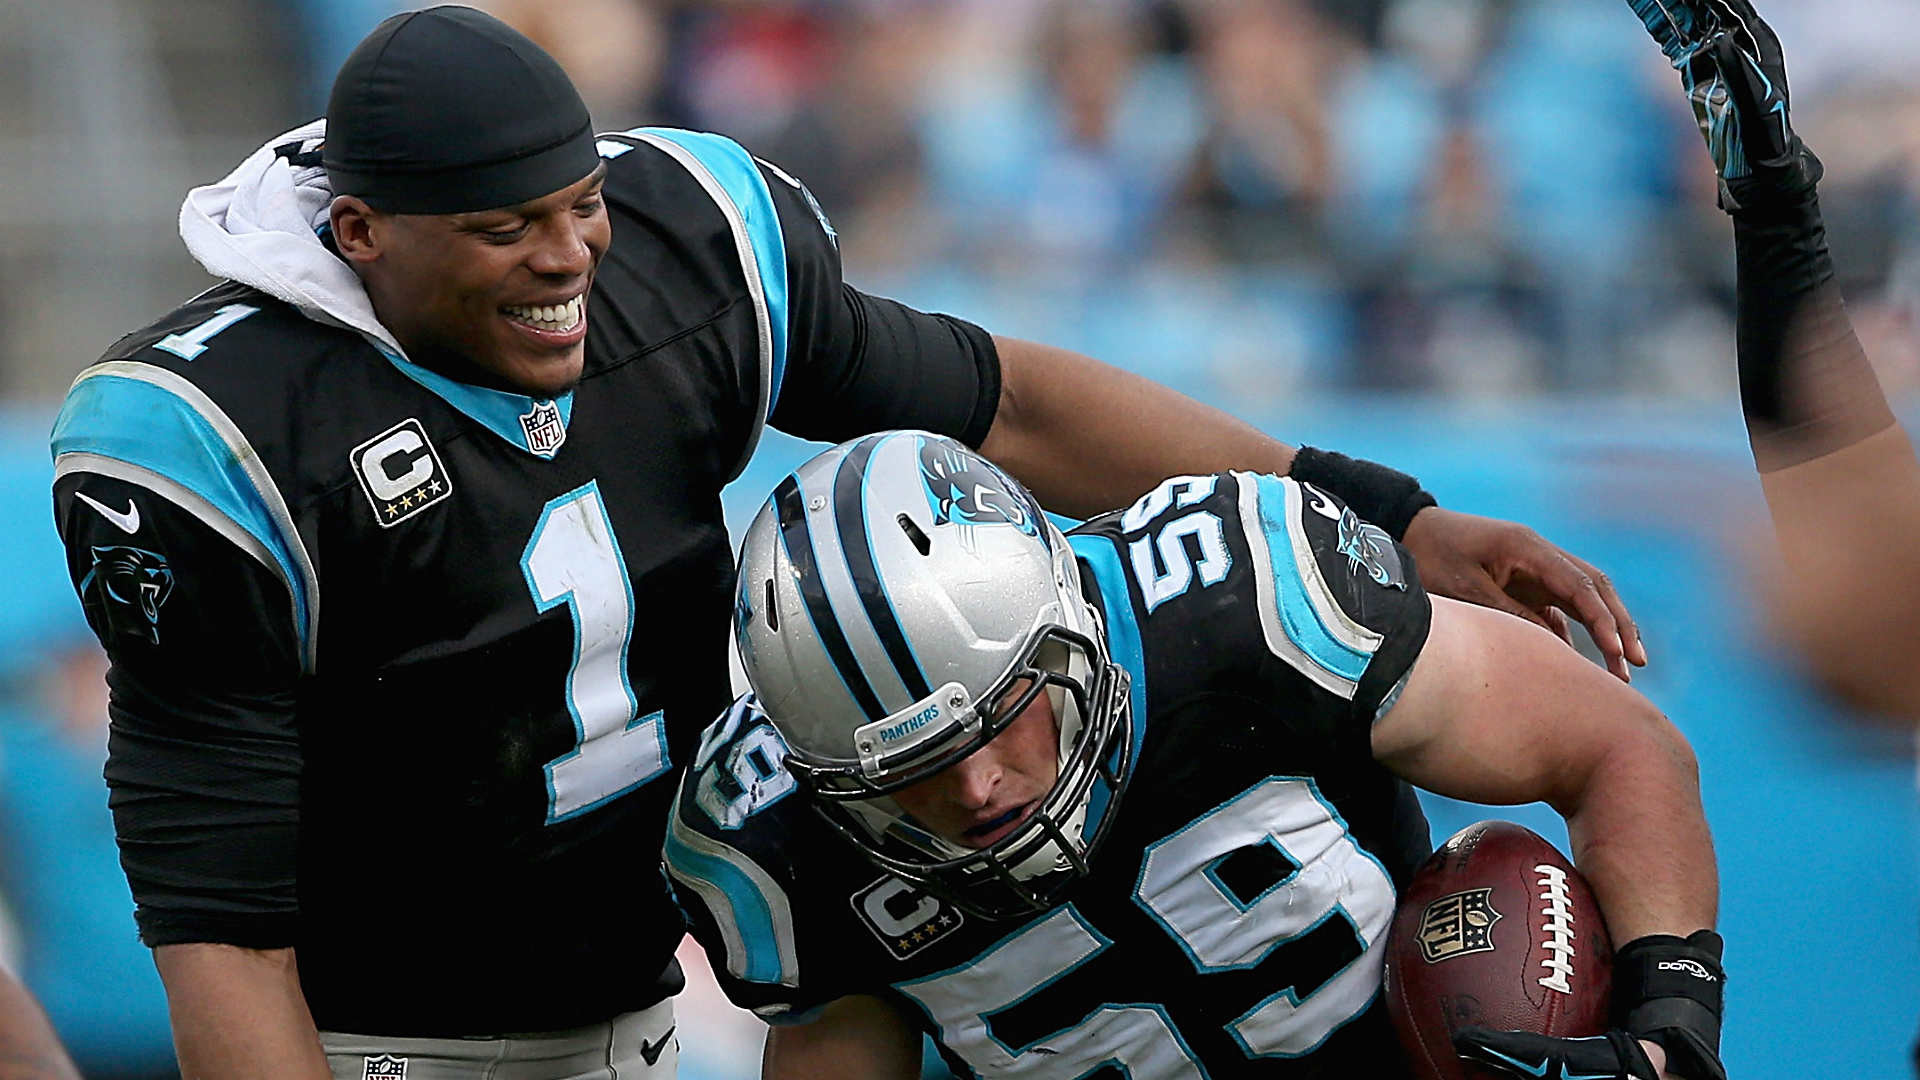 1920x1080 Oh baby: Carolina Panthers fan names newborn son after 2 favorite players